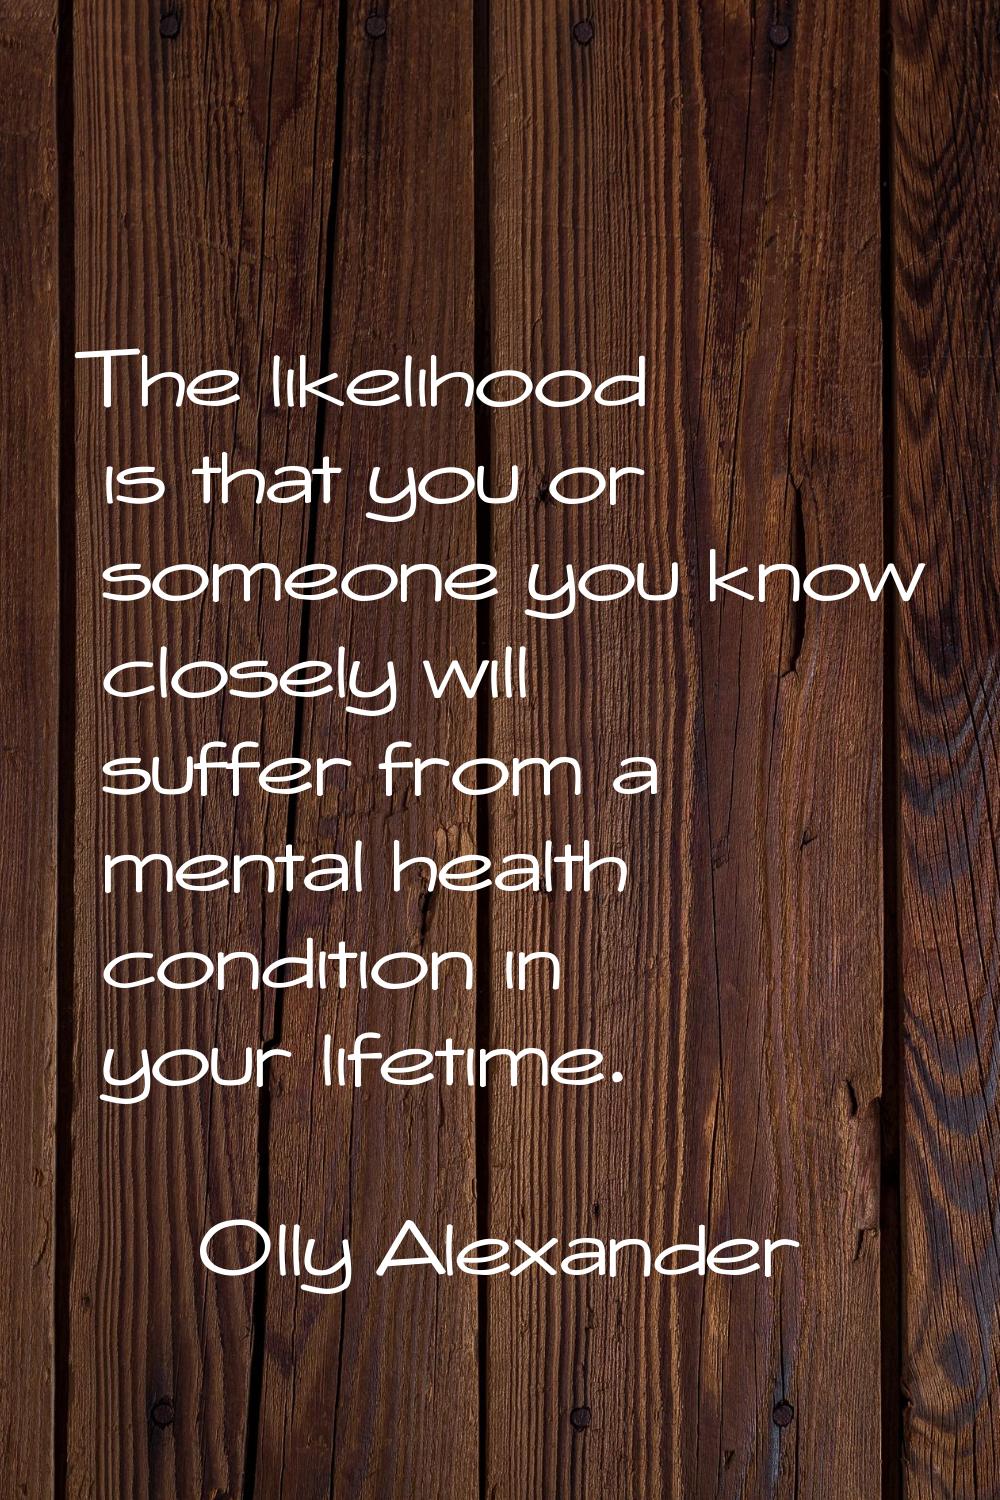 The likelihood is that you or someone you know closely will suffer from a mental health condition i